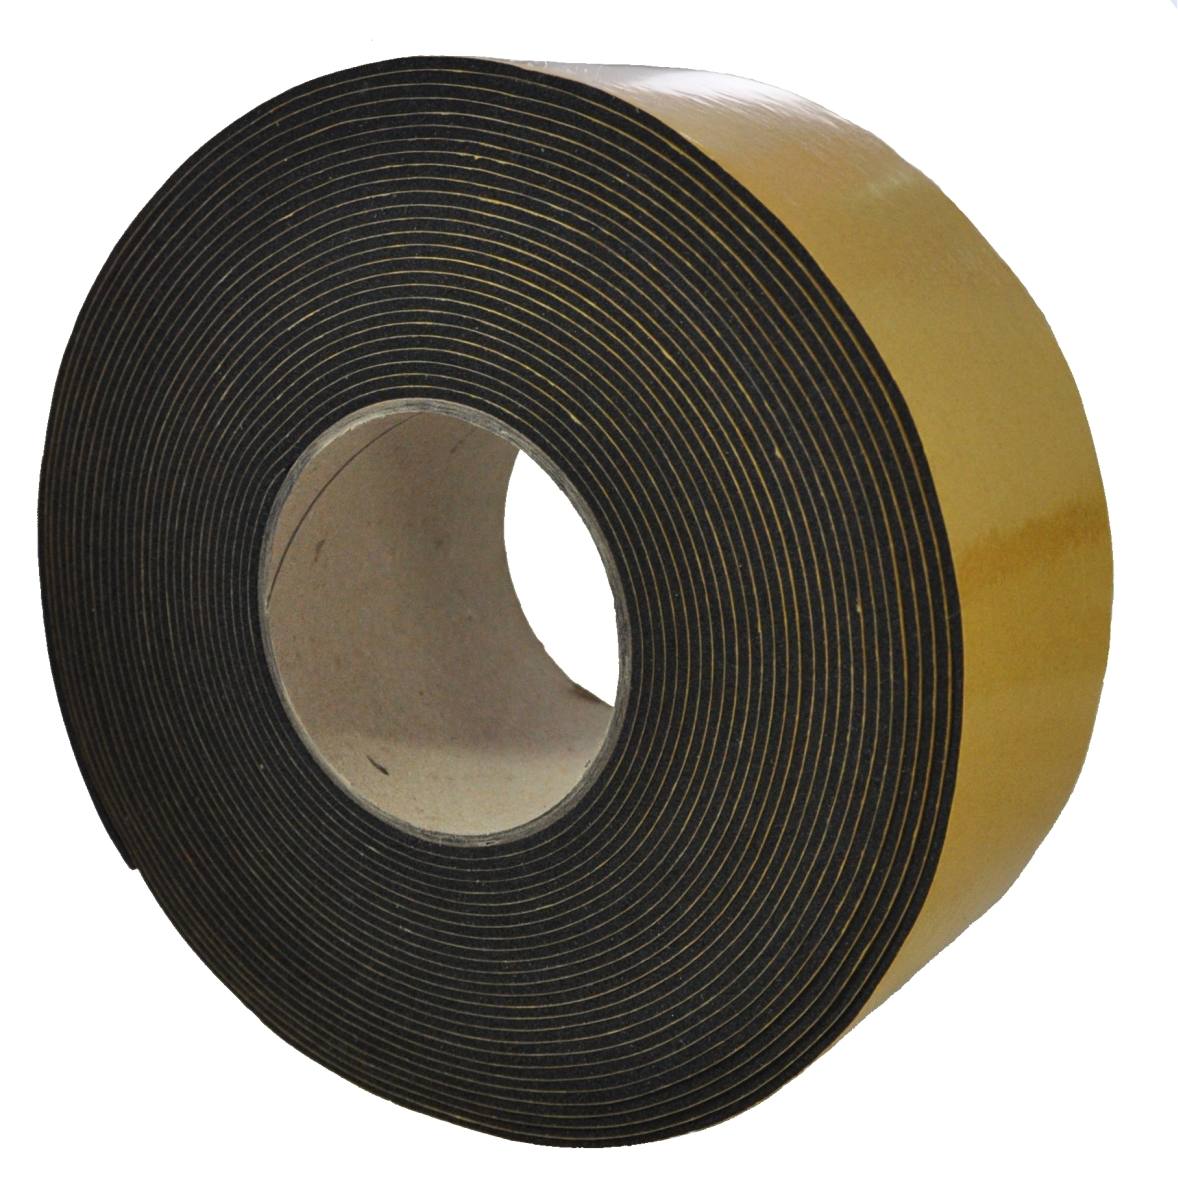 S-K-S EPDM 1mmx15mmx10m black self-adhesive on one side